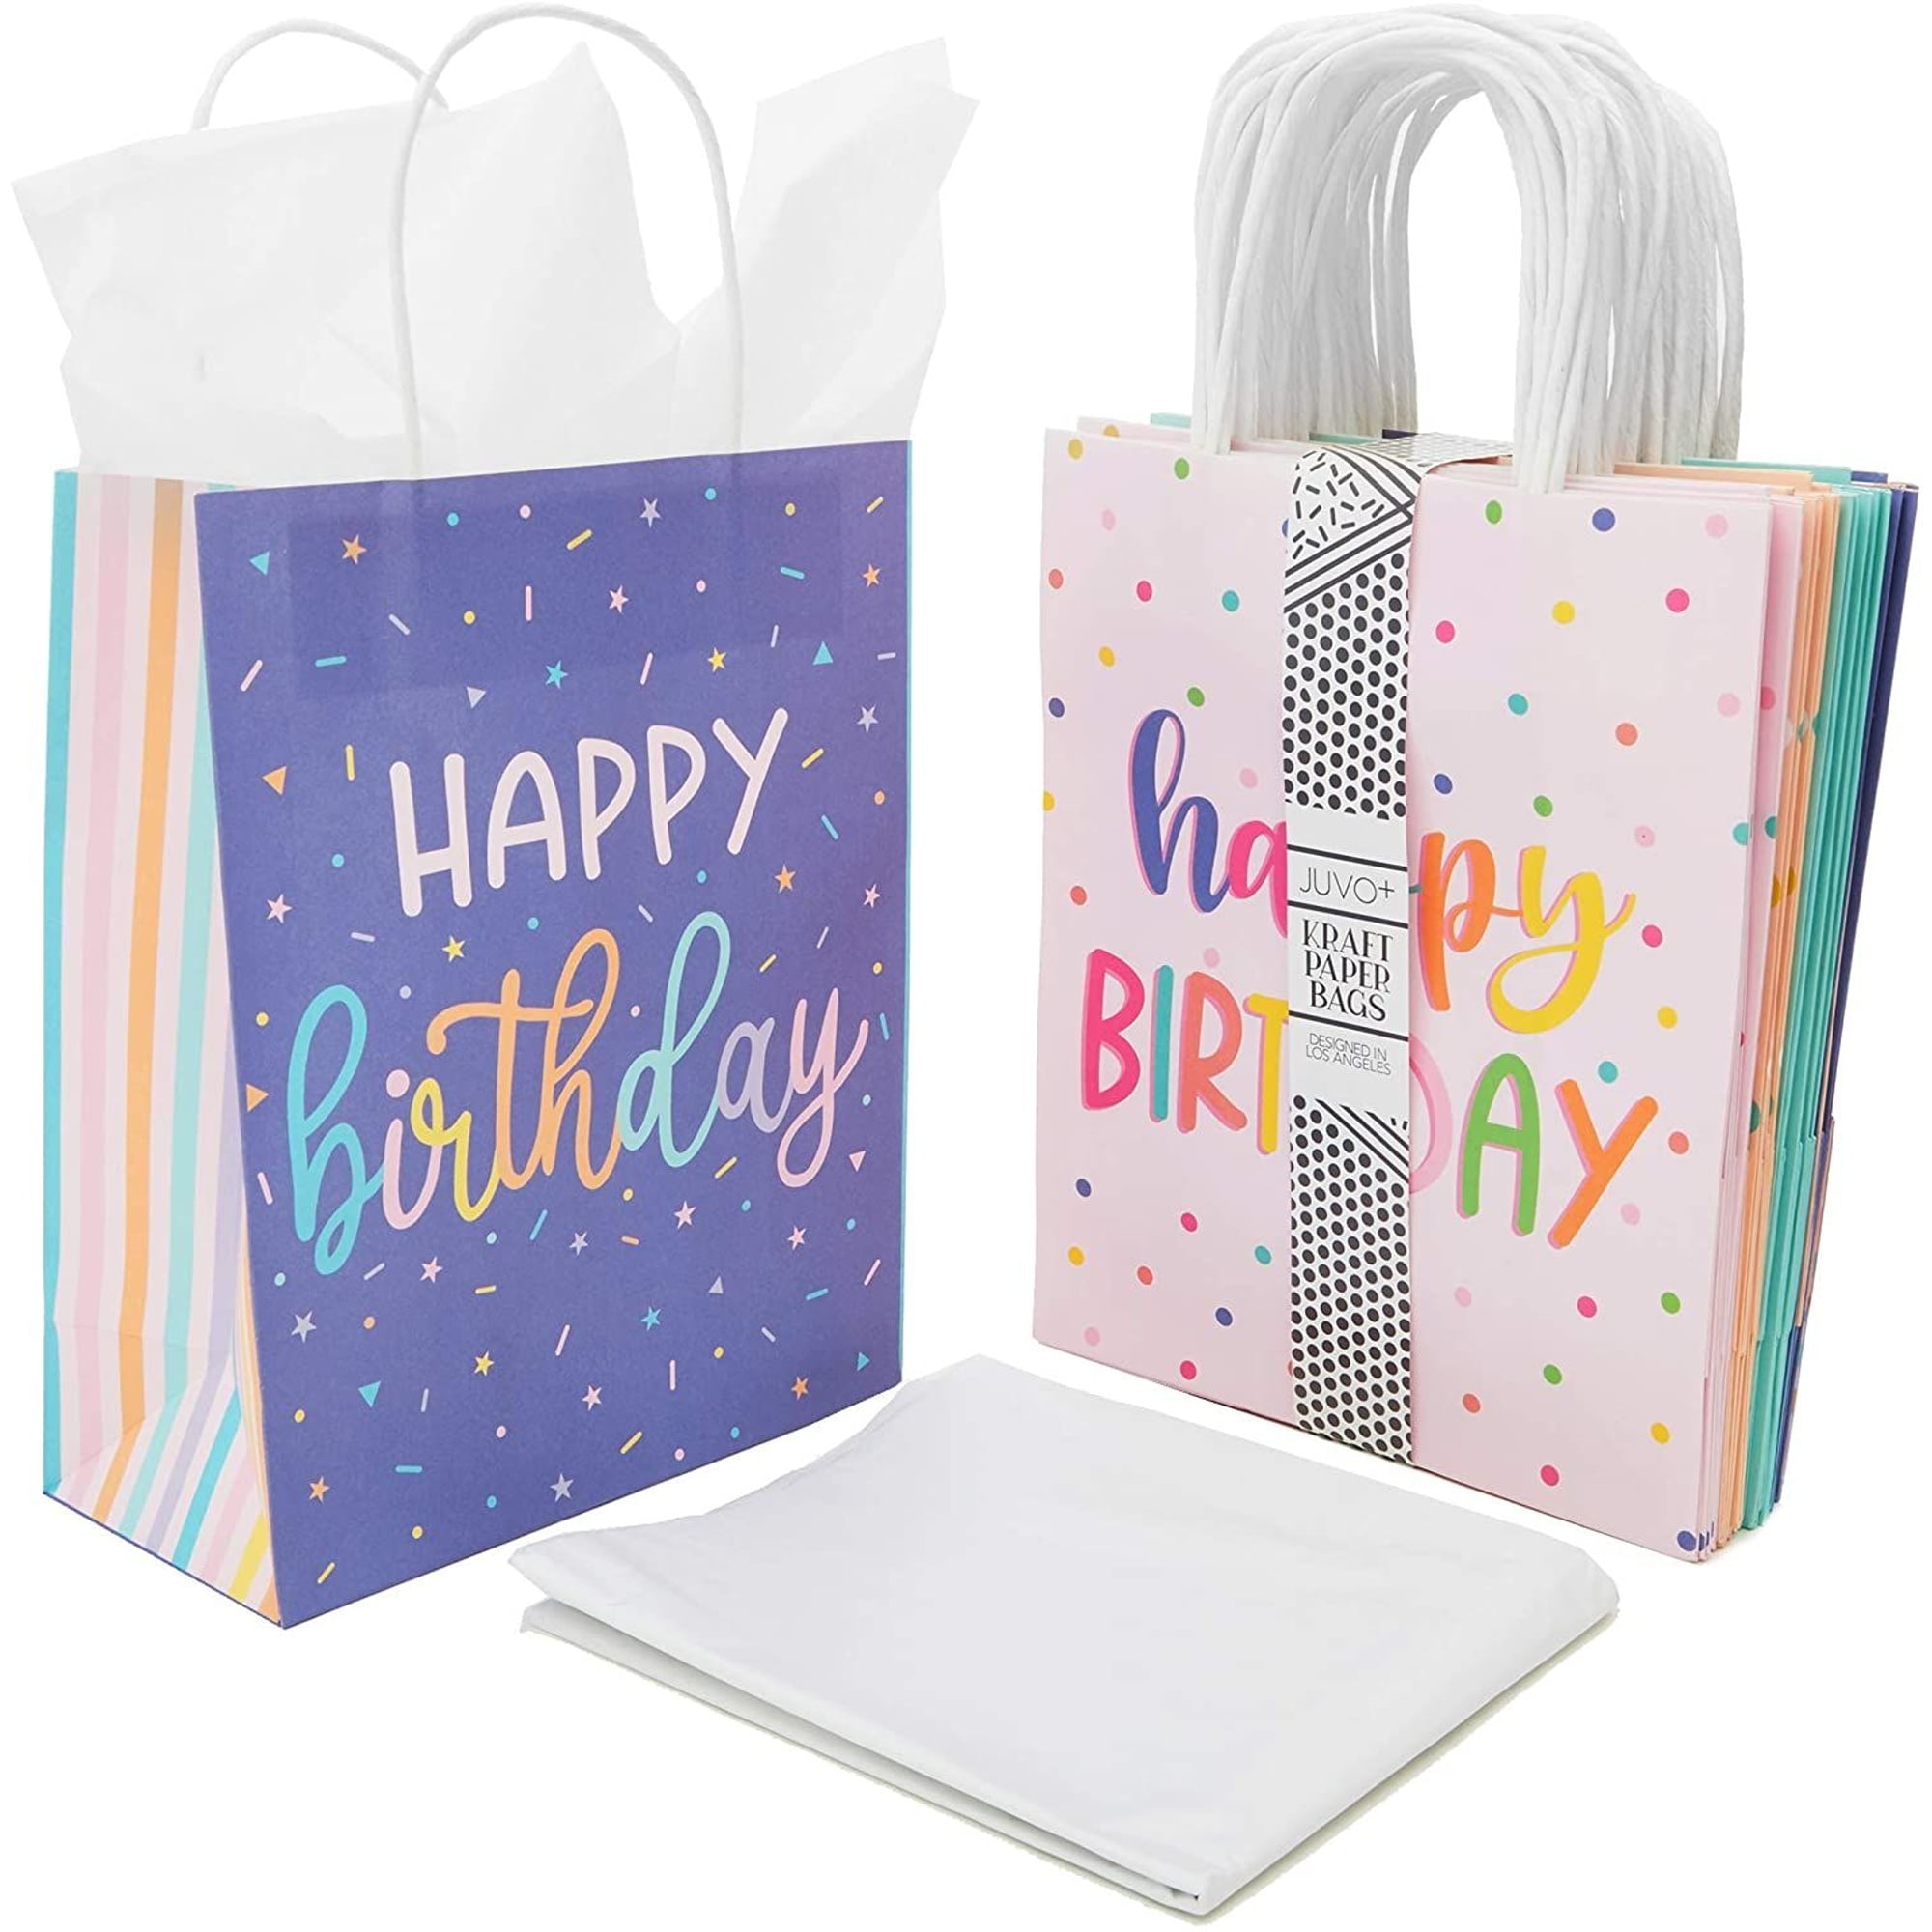  OfficeCastle 12 Pcs Birthday Gift Bags with Tissue Paper,  10x4.75x13 Inches, Birthday Gift Bags Assortments, Birthday Bags for Kids,  Women and Men : Health & Household